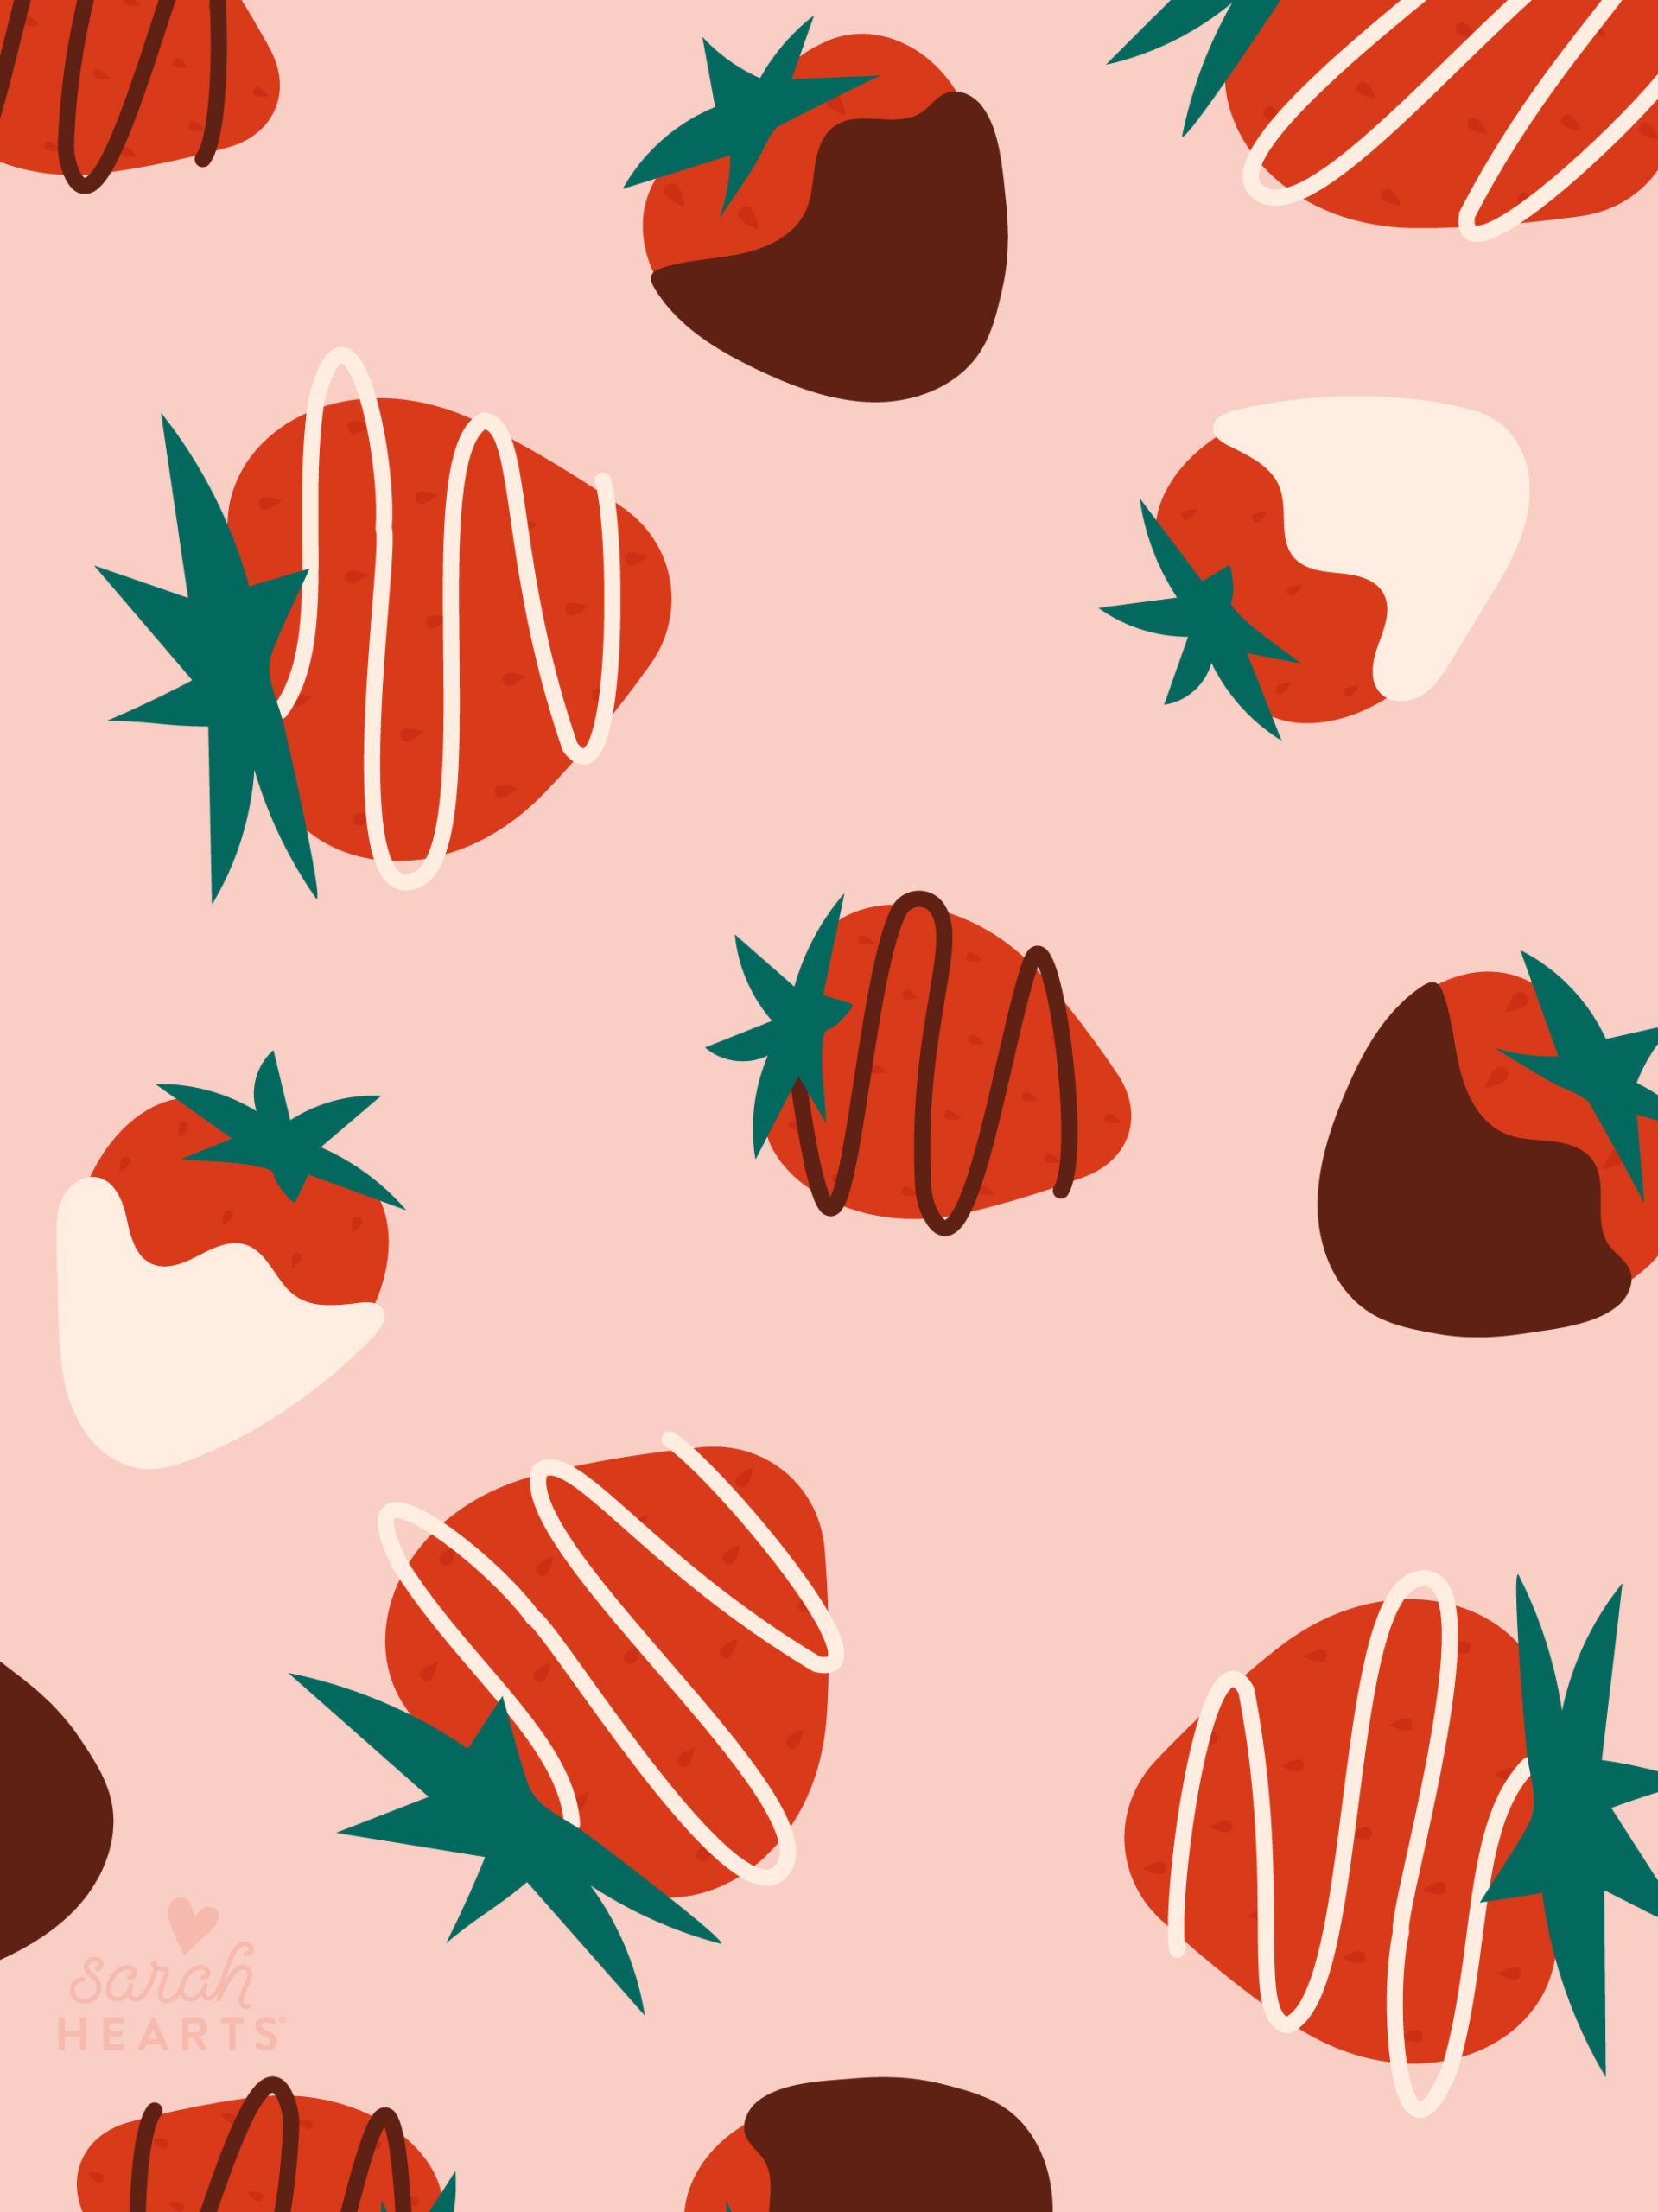 A free phone wallpaper for you! Chocolate covered strawberries on a pink background. - Strawberry, February, chocolate